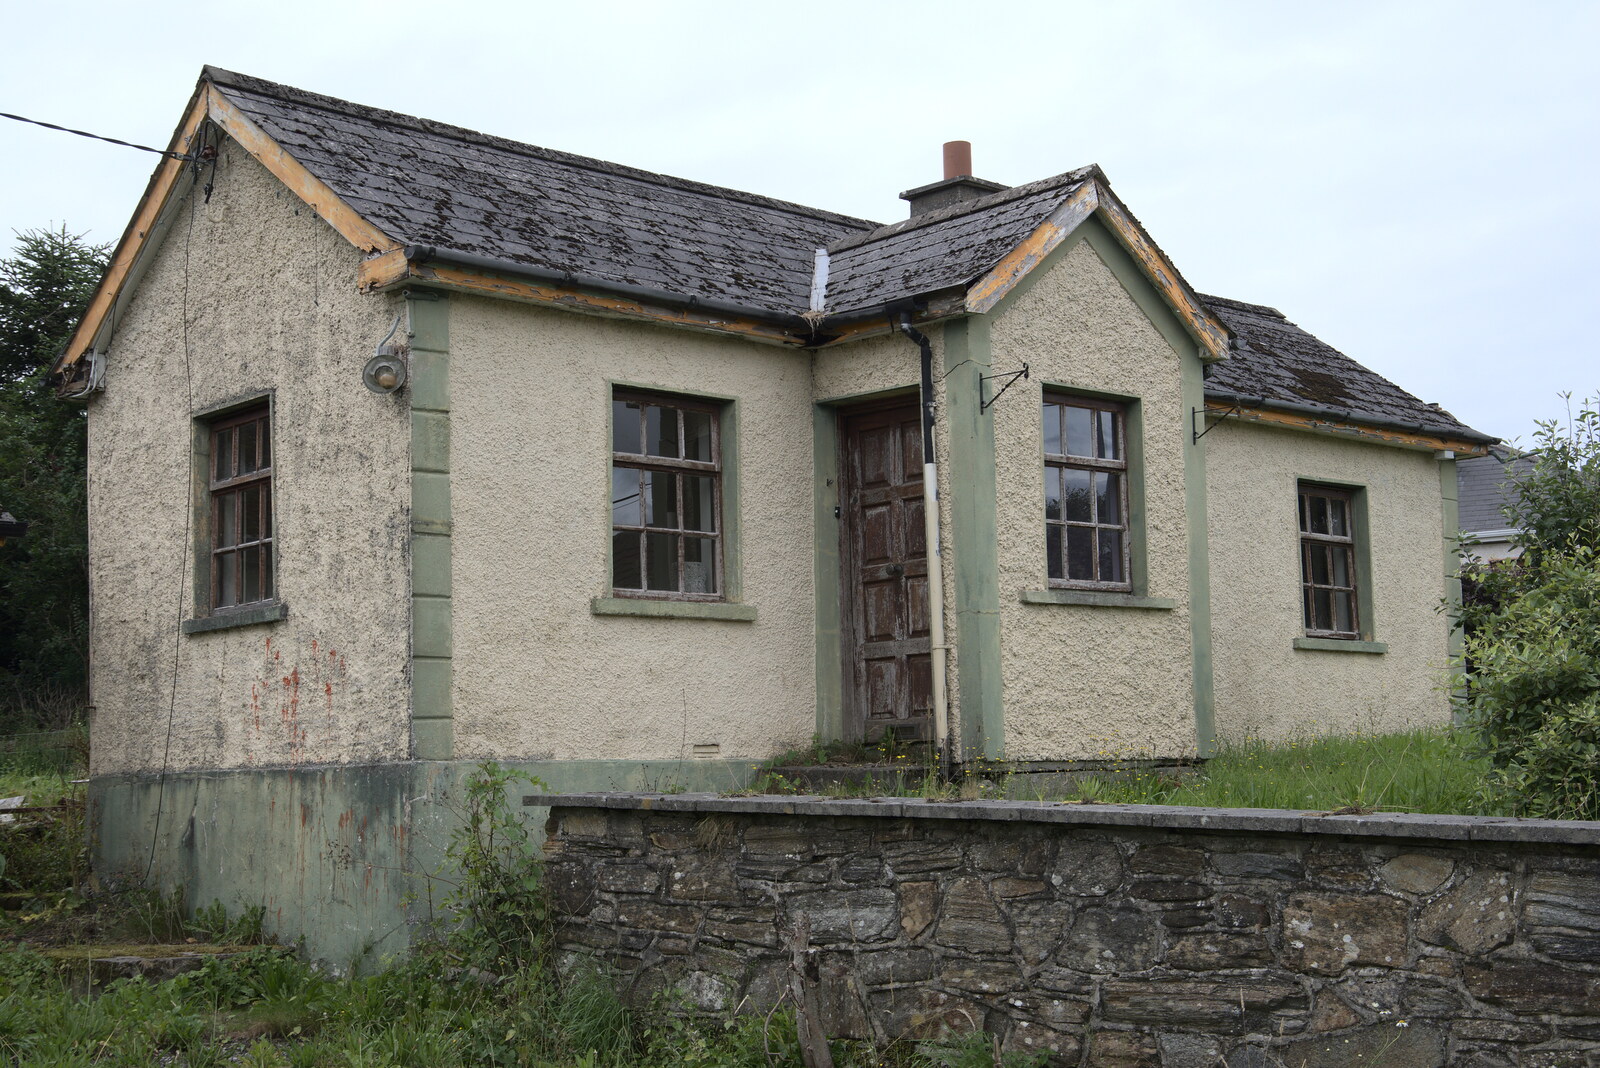 A Trip to Manorhamilton, County Leitrim, Ireland - 11th August 2021: A derlelict house on the road to the Mullies